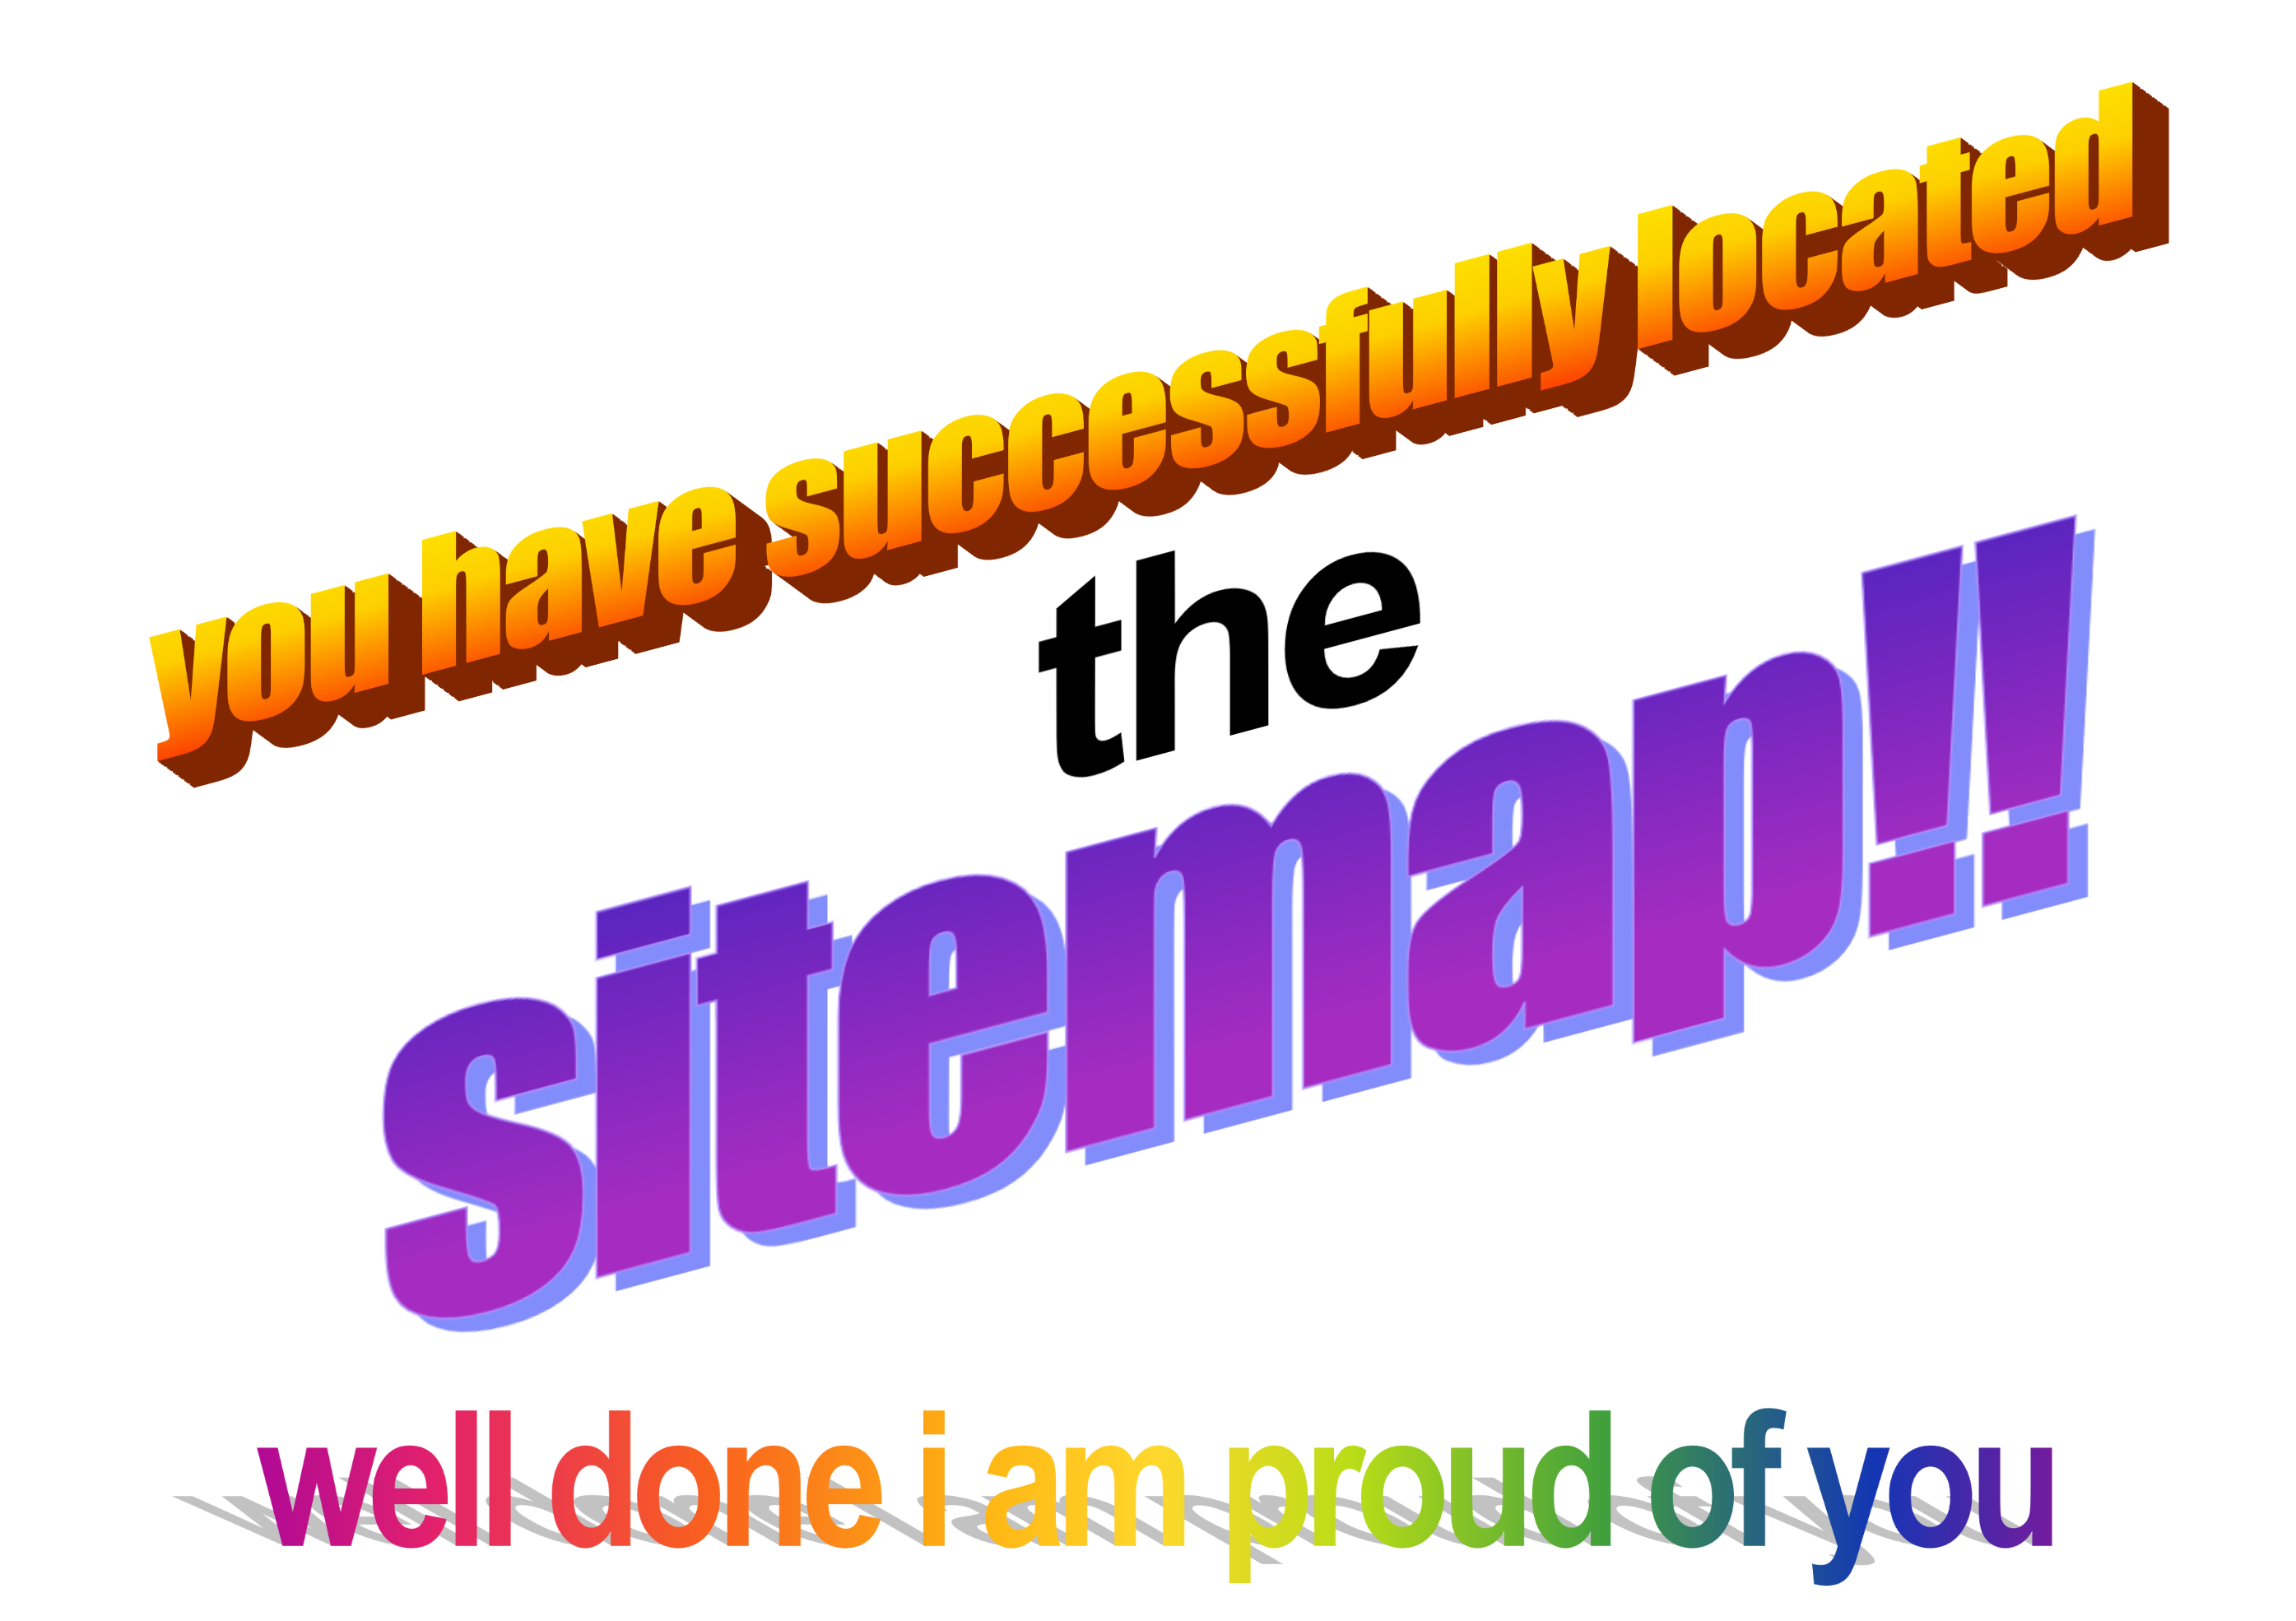 you have reached the sitemap (i am proud of you)